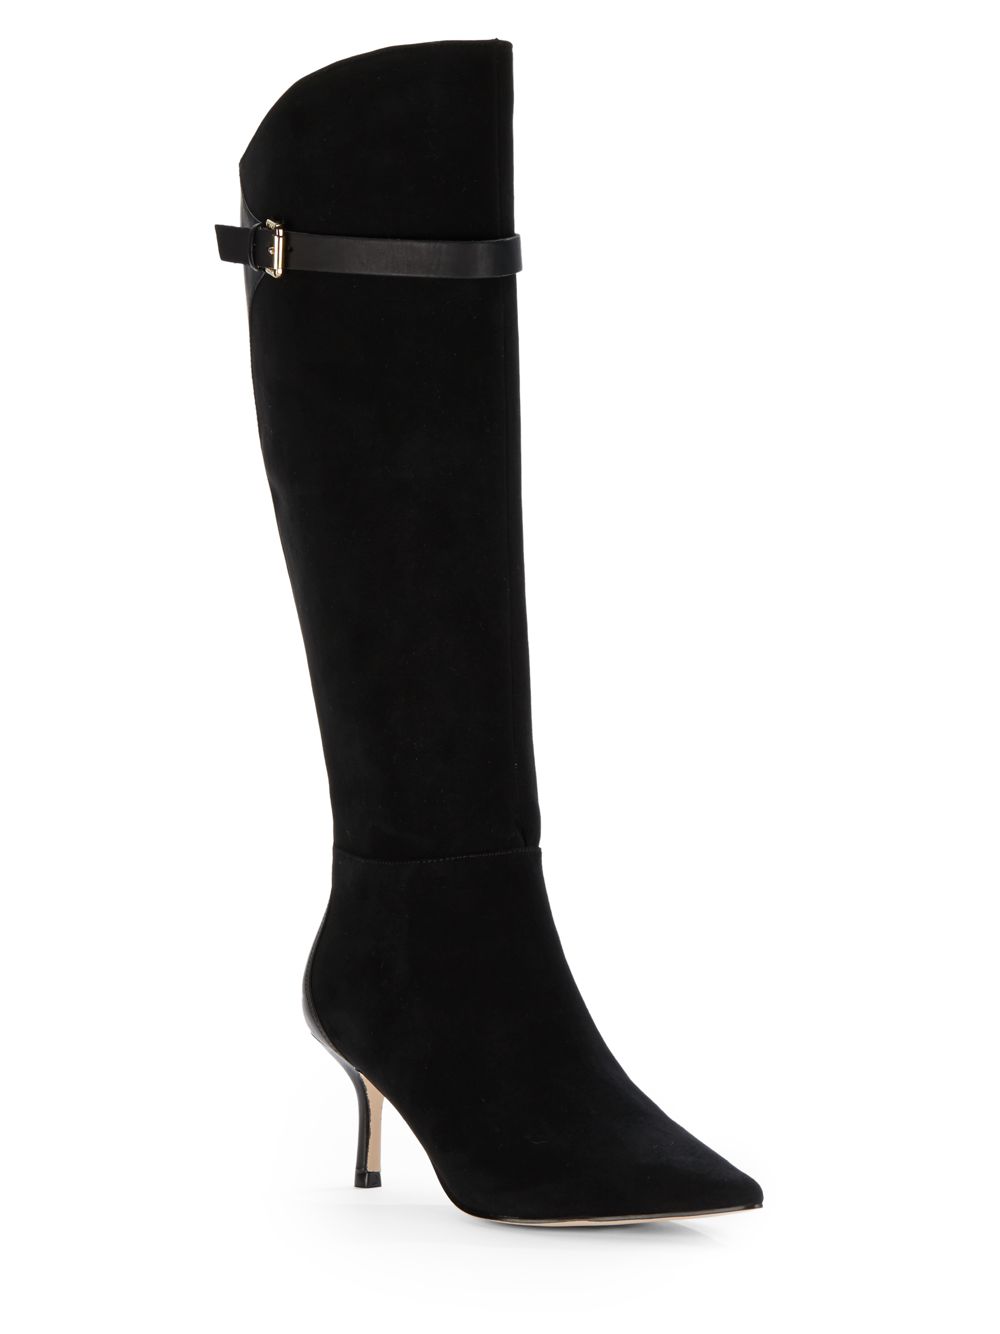 Ivanka Trump Suede Point Toe Boots in Black | Lyst